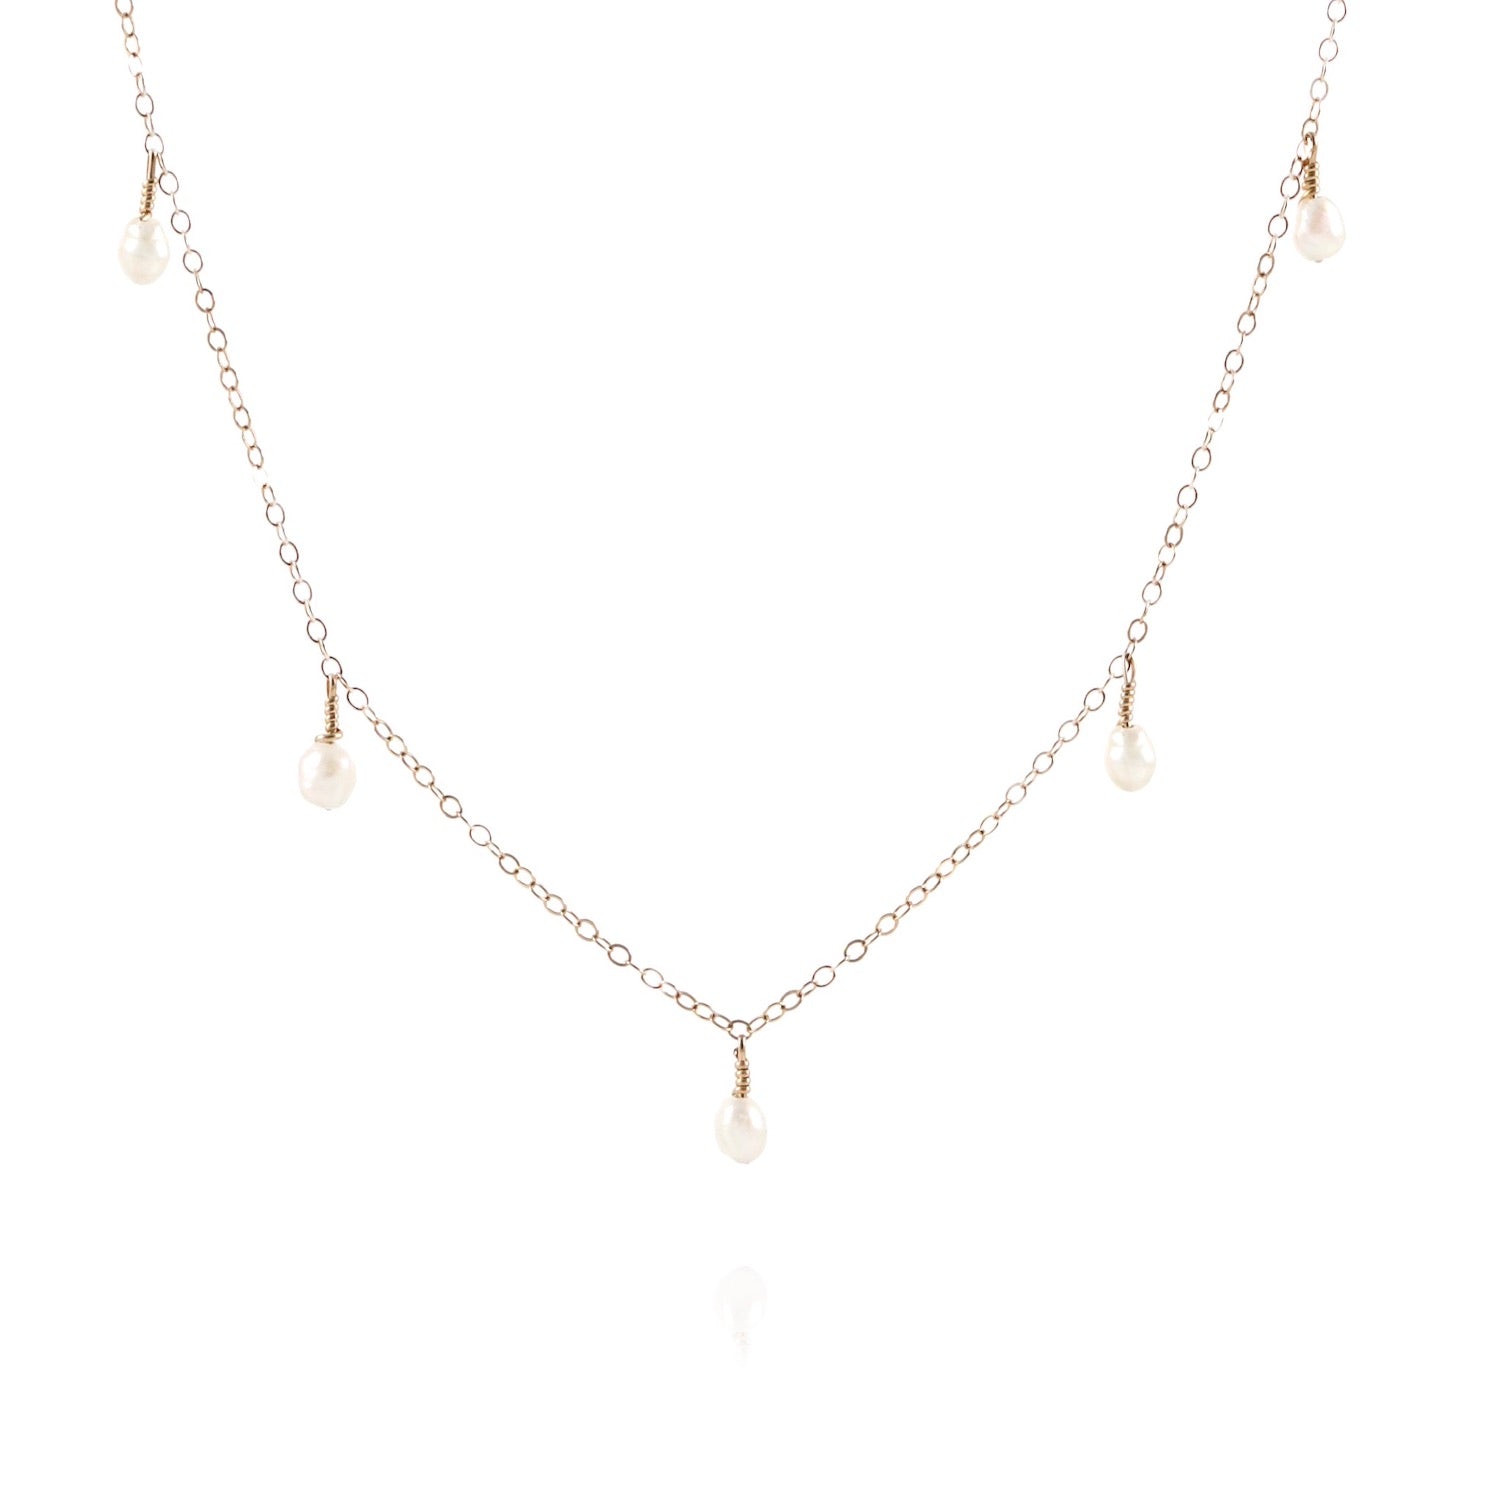 pearl statement necklace in 14k gold filled chain